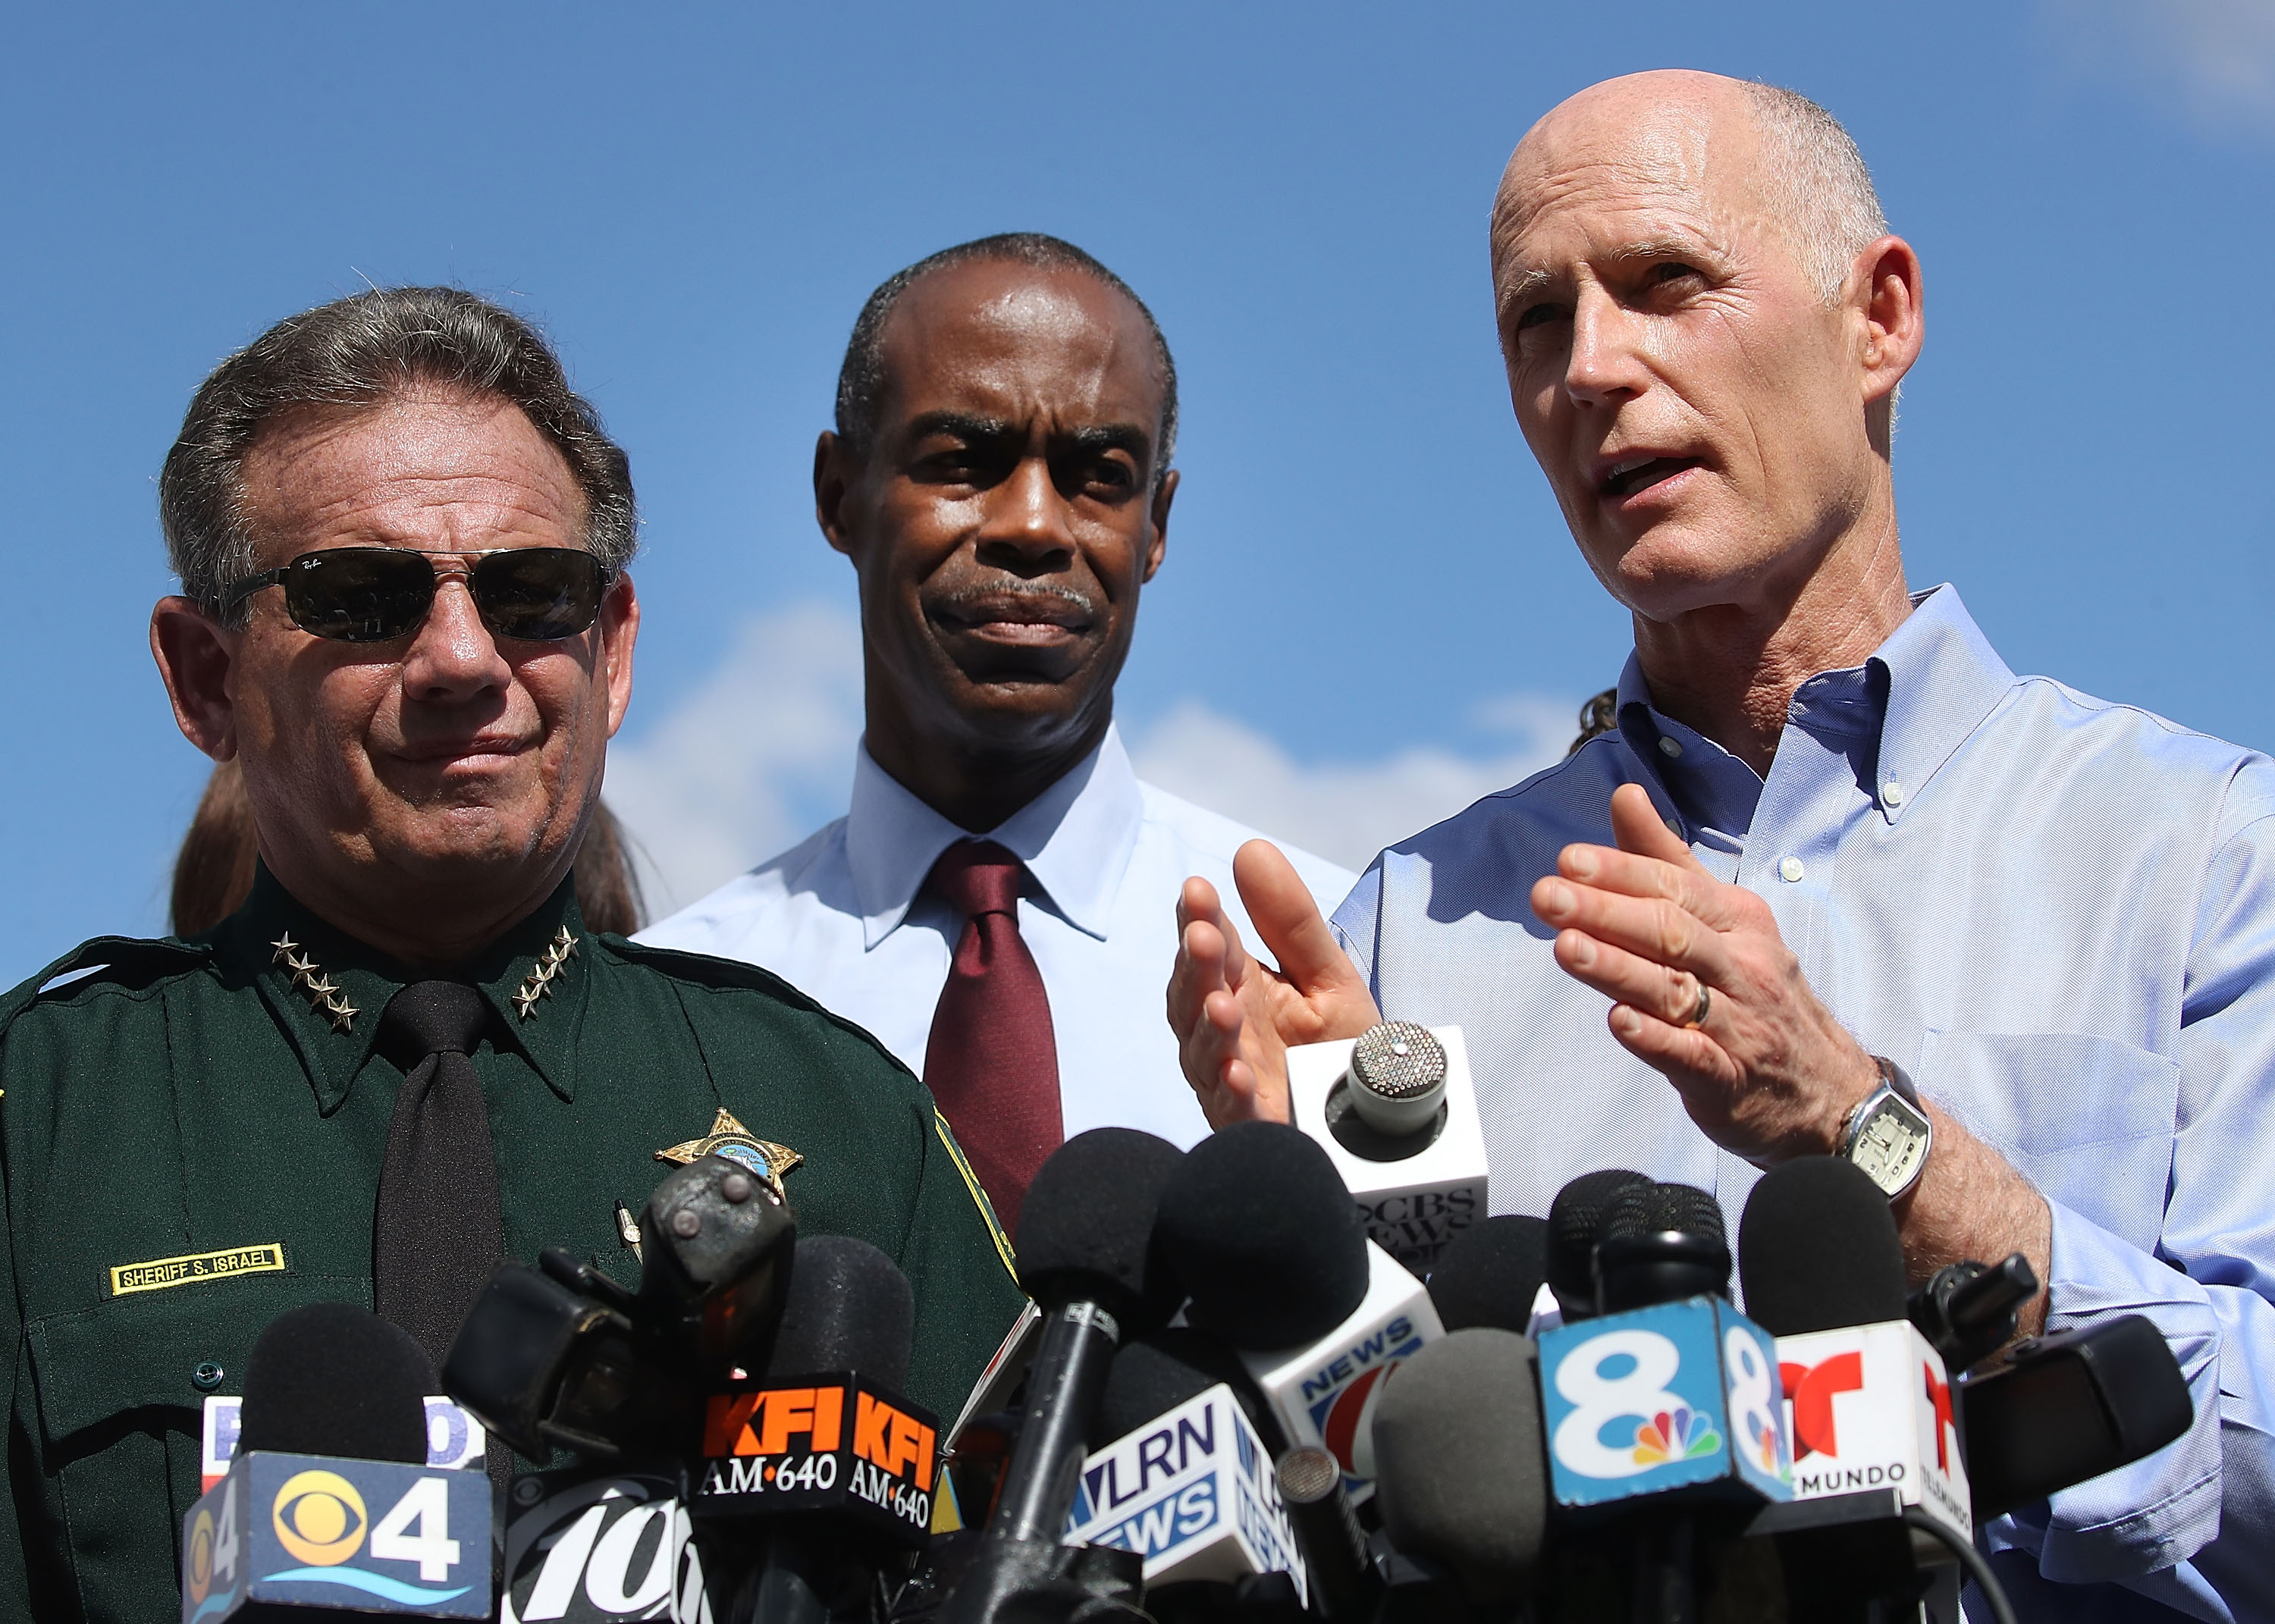 PARKLAND, FL - FEBRUARY 15: Florida Governor Rick Scott (R), Broward County Superintendent of Schools, Robert W. Runcie (C) and Broward County Sheriff, Scott Israel (L) speak to the media about the mass shooting at Marjory Stoneman Douglas High School where 17 people were killed yesterday, on February 15, 2018 in Parkland, Florida. Police arrested the suspect after a short manhunt, and have identified him as 19 year old former student Nikolas Cruz. (Photo by Mark Wilson/Getty Images)